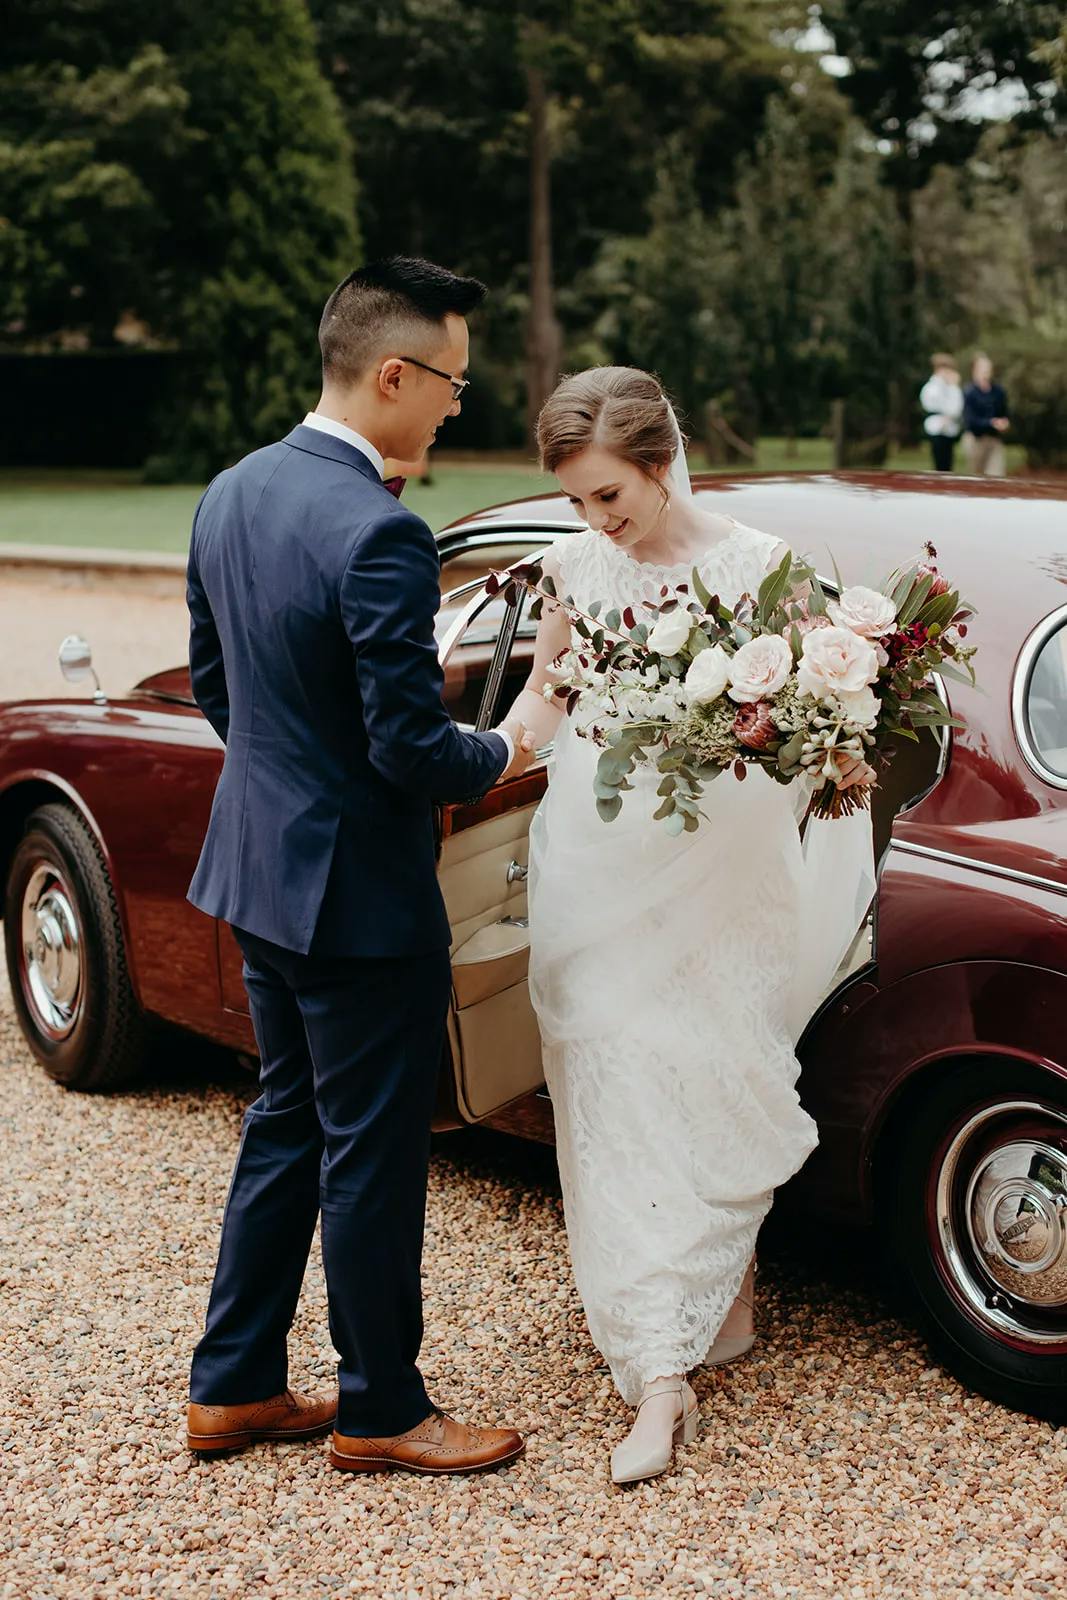 A bride in a white dress and groom in a blue suit stand next to a vintage maroon car. The groom holds the bride's bouquet of flowers as she steps out of the car. Trees and greenery are blurred in the background.